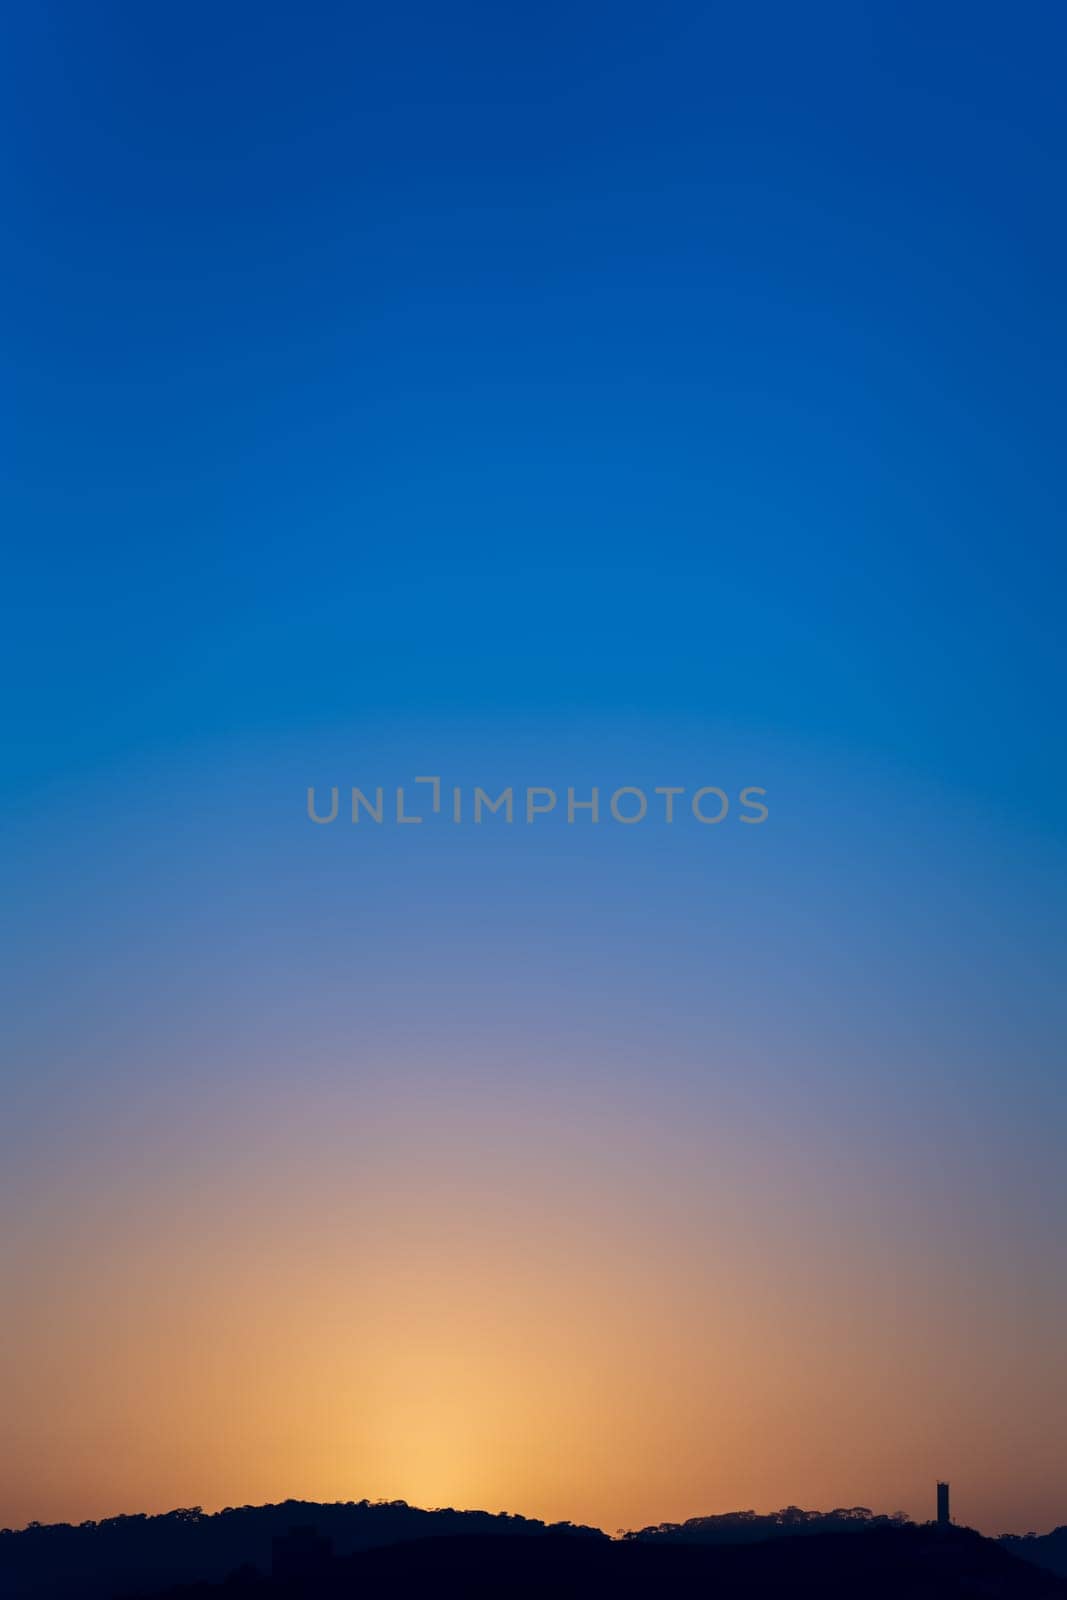 Sunrise behind a mountain and tower, with the blue sky transitioning to warm sunlight hues.